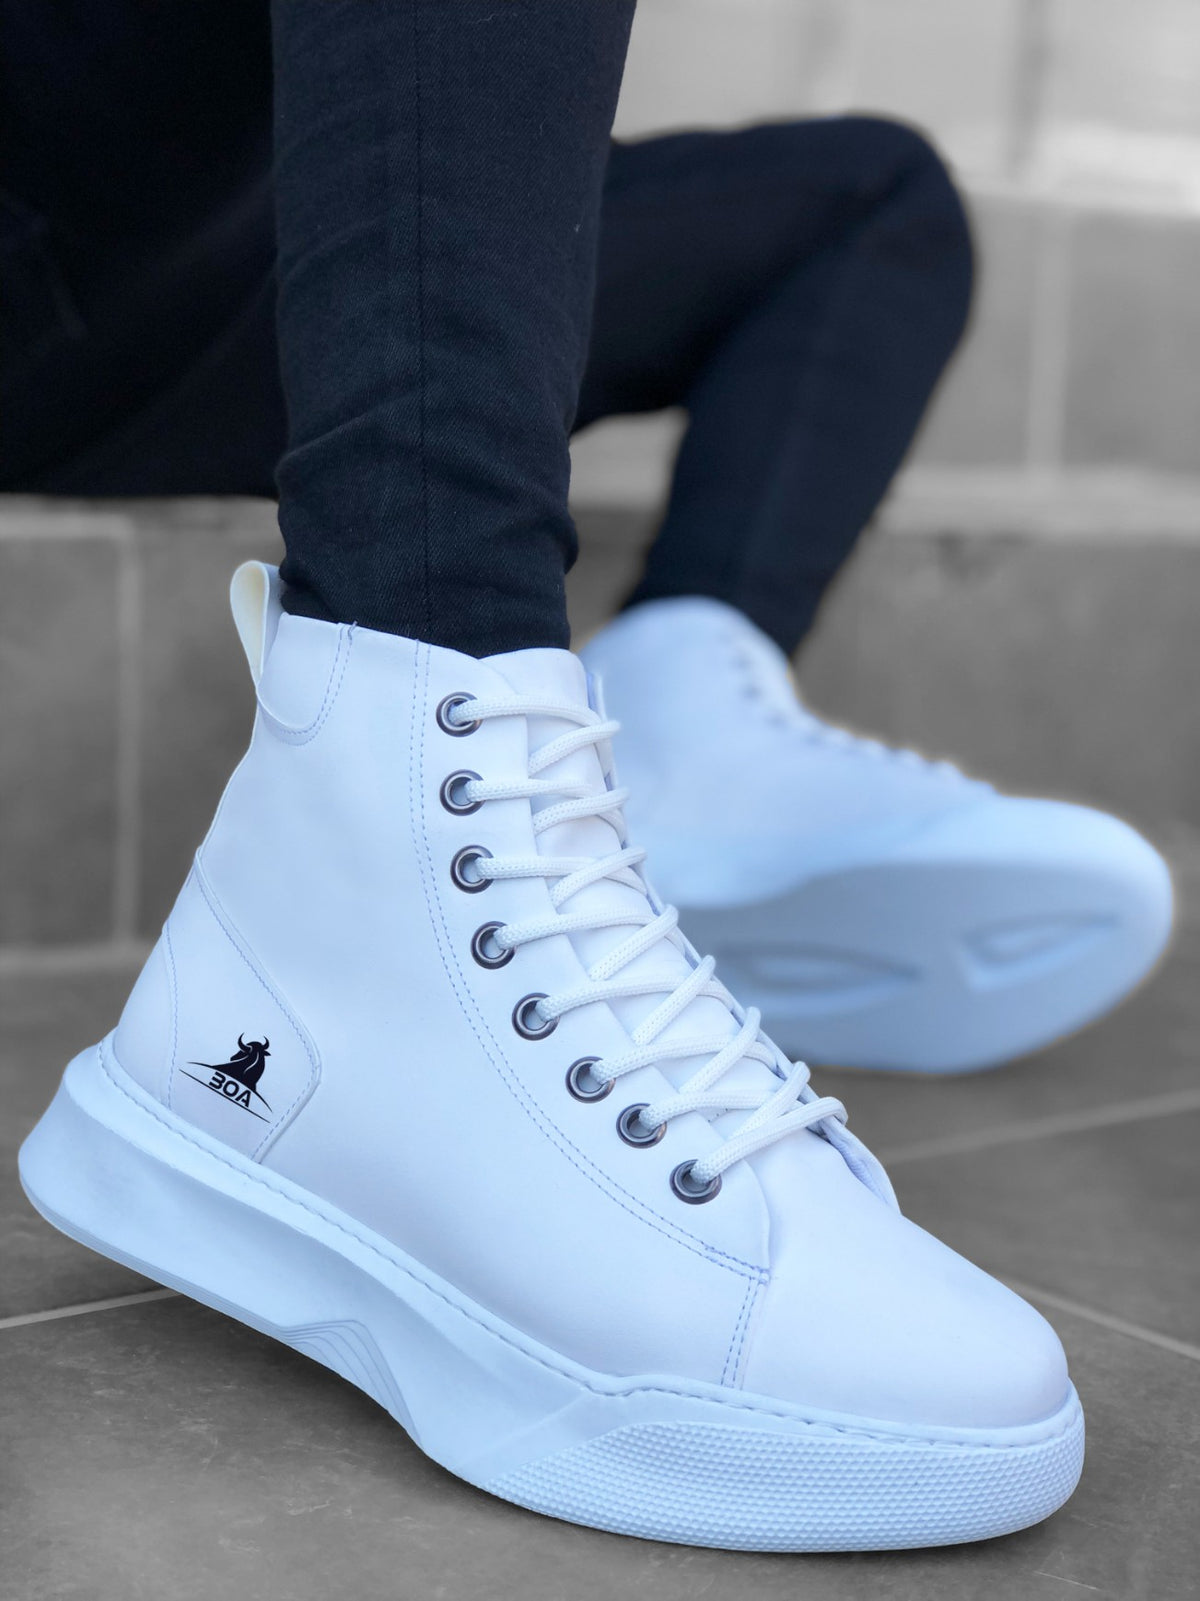 BA0155 Lace-Up Men's High Sole White Sport Boots - STREETMODE ™